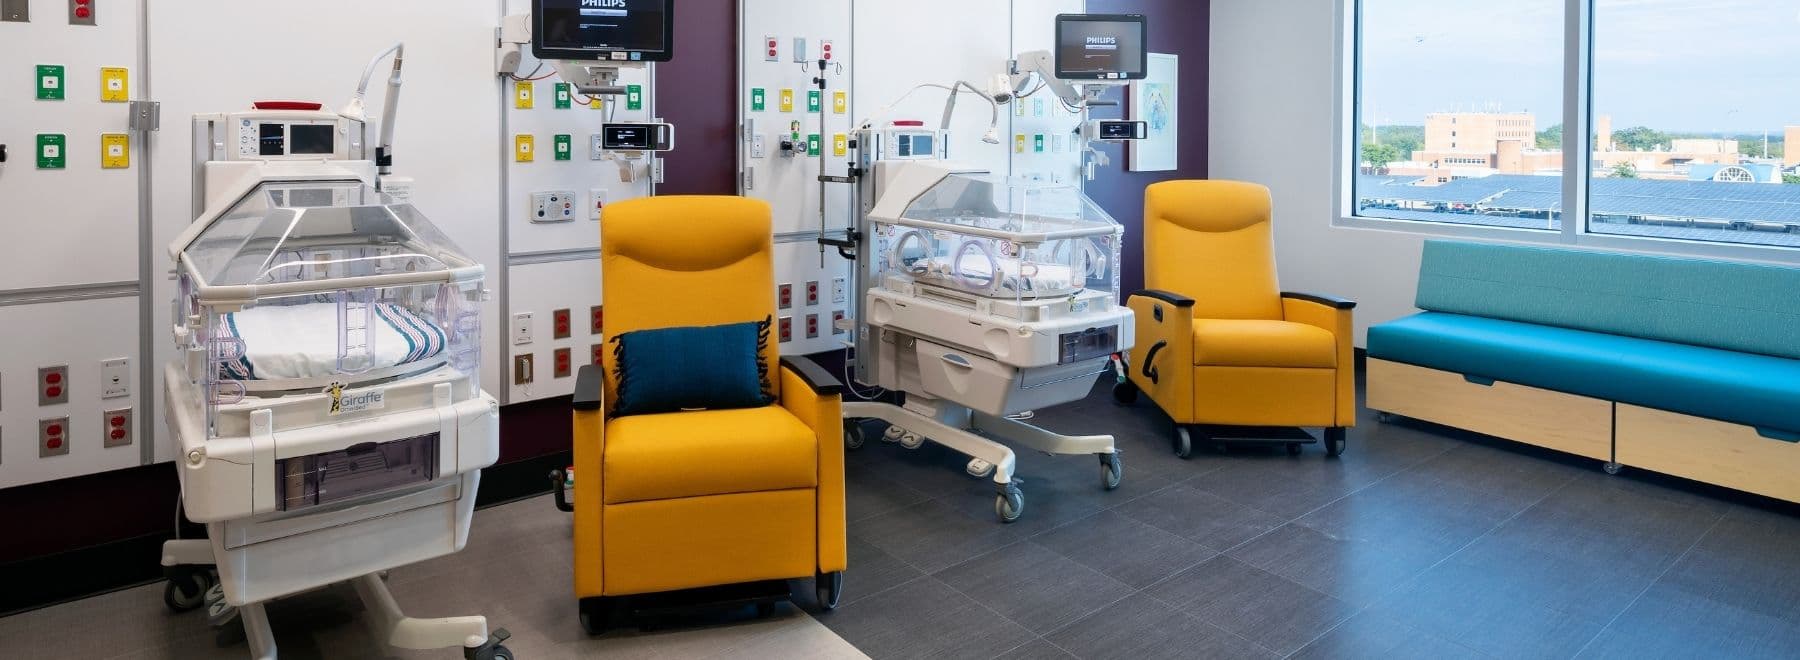 A NICU room in Sanderson Tower at Children's of Mississippi